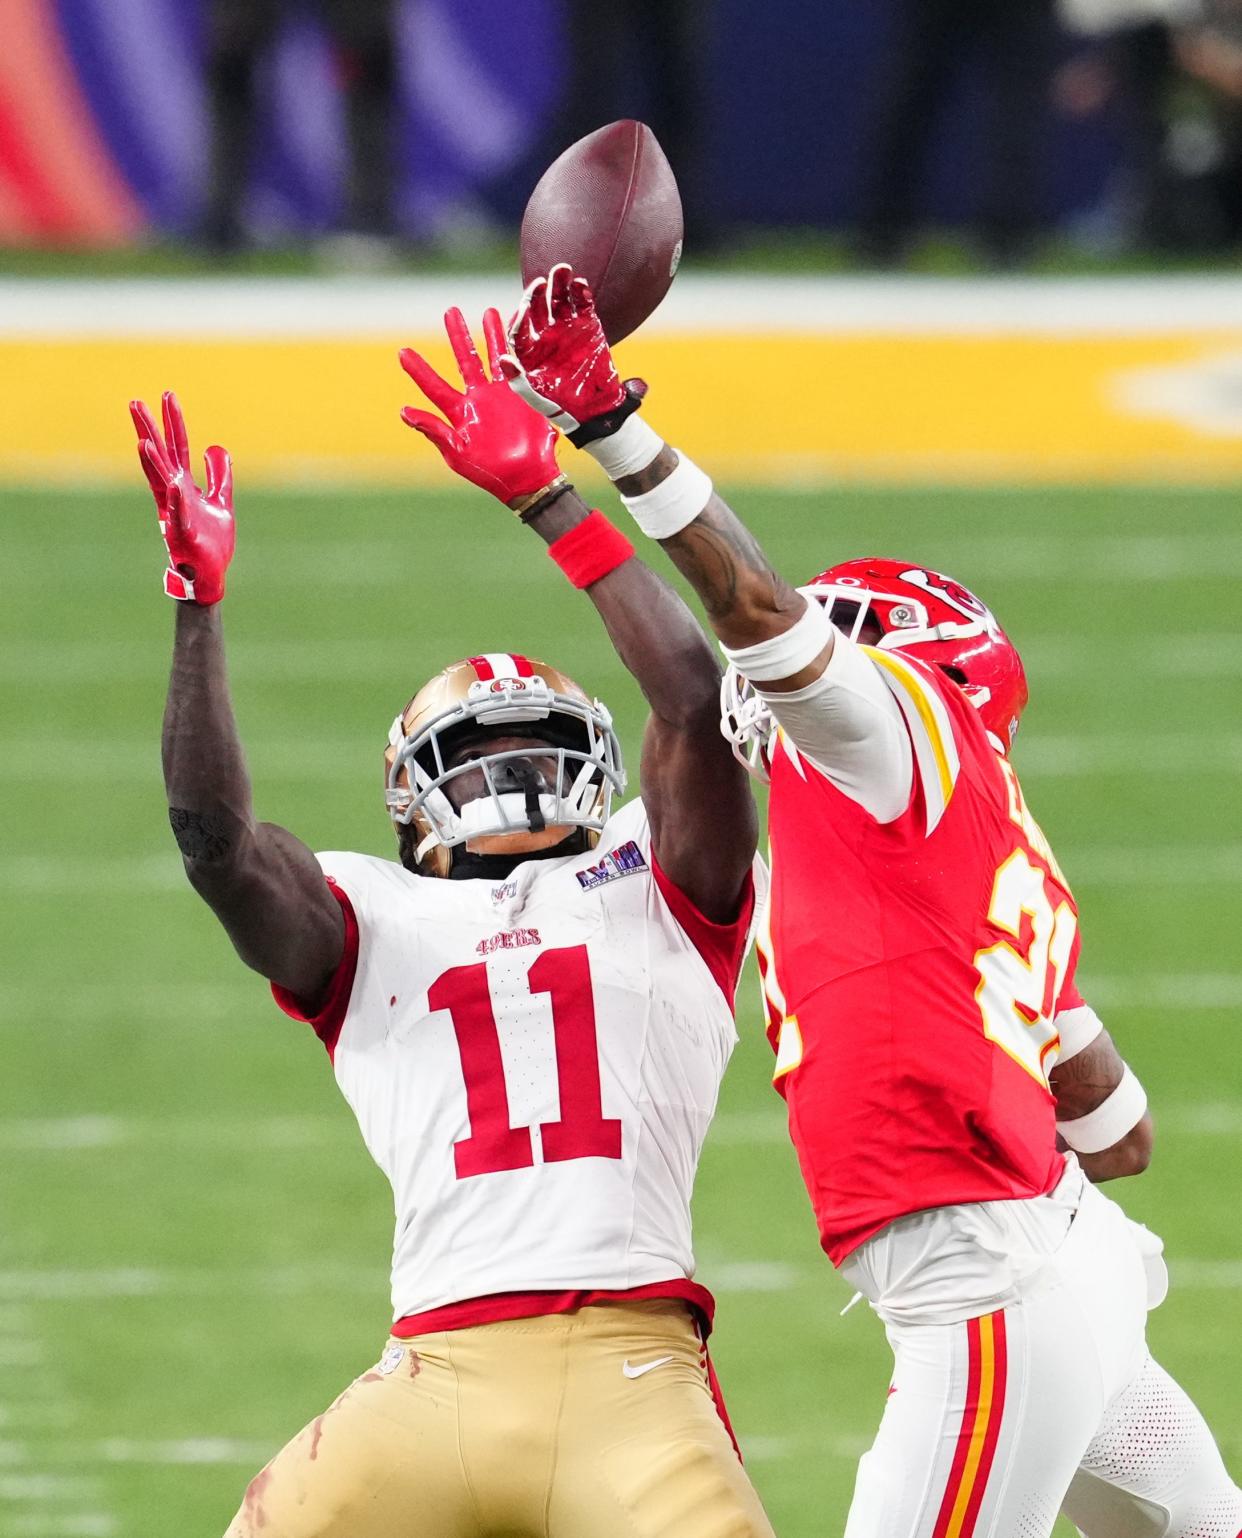 Kansas City Chiefs safety Mike Edwards breaks up a pass intended for San Francisco 49ers wide receiver Brandon Aiyuk